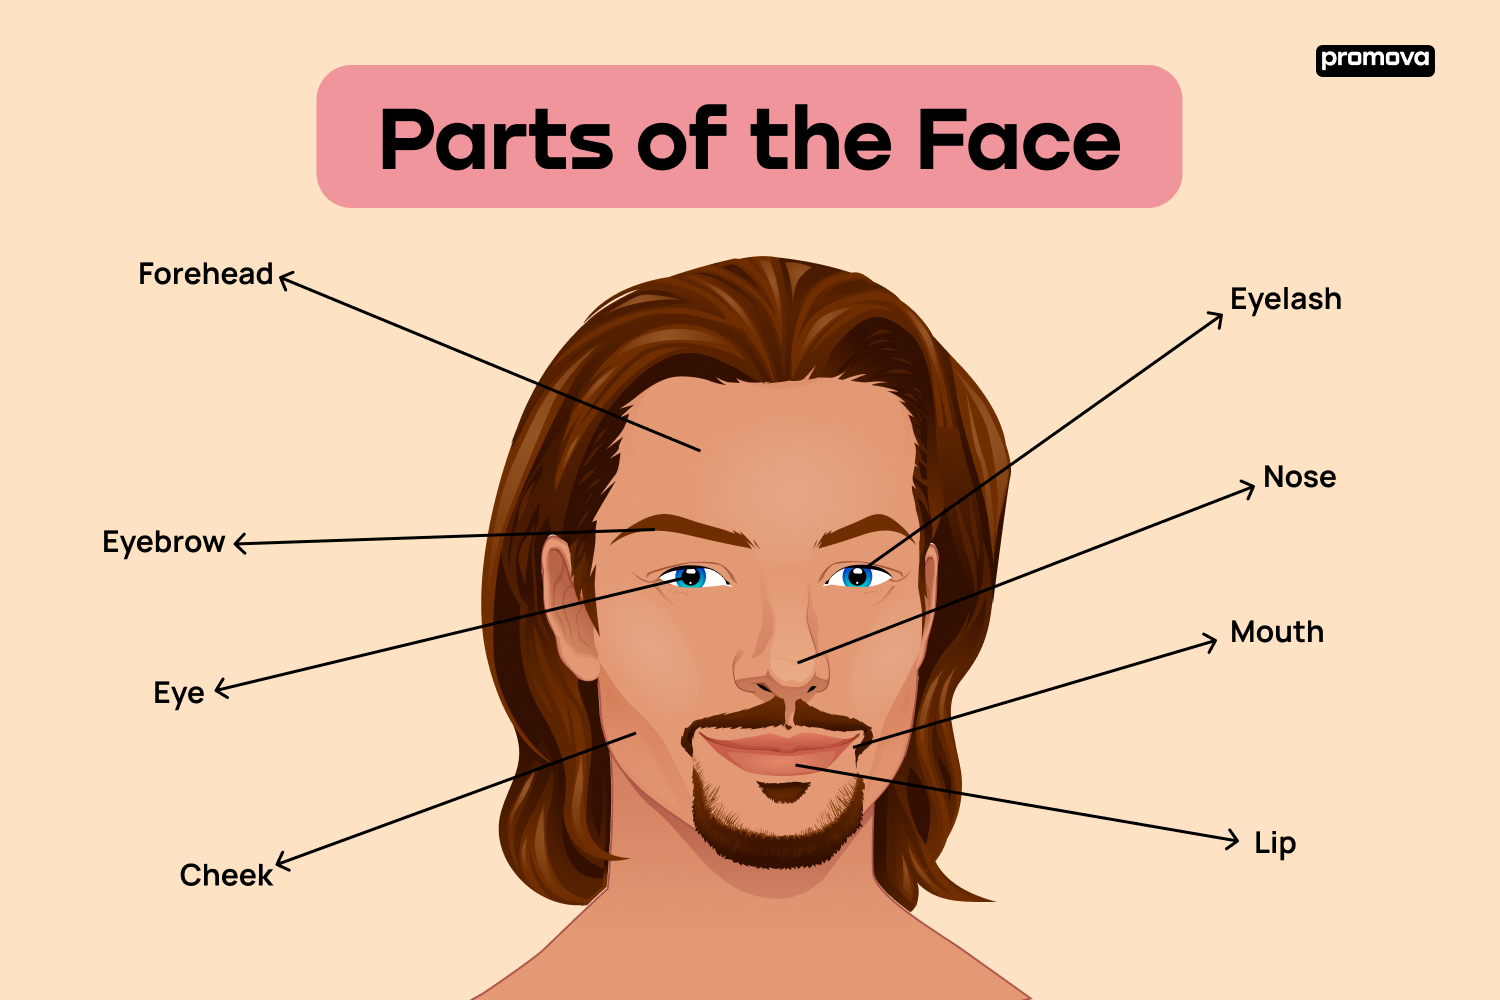 Exploring Facial Anatomy: Vocabulary Guide for Parts of the Face